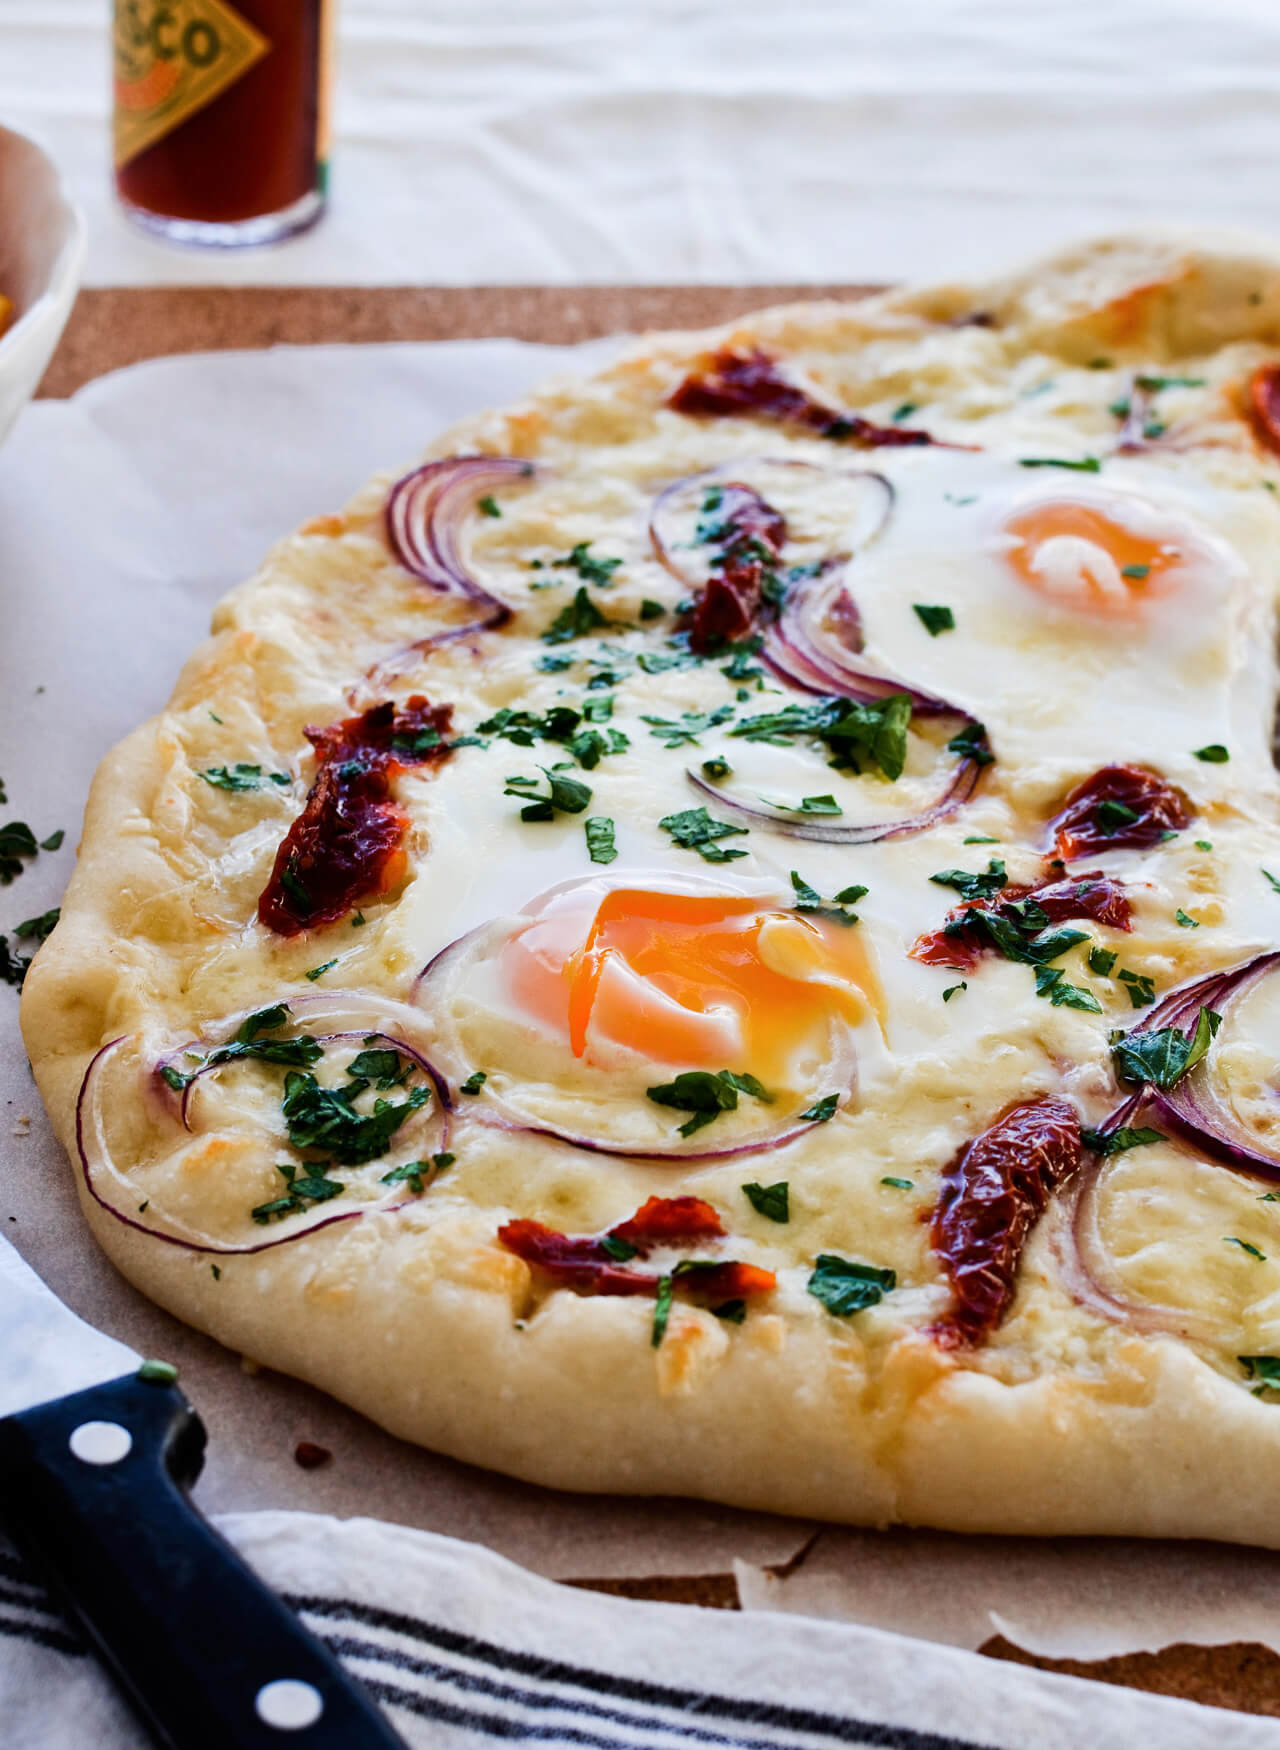 Easy vegetarian sun dried tomato onion breakfast pizza with eggs, easy brunch recipe that is quickly made.